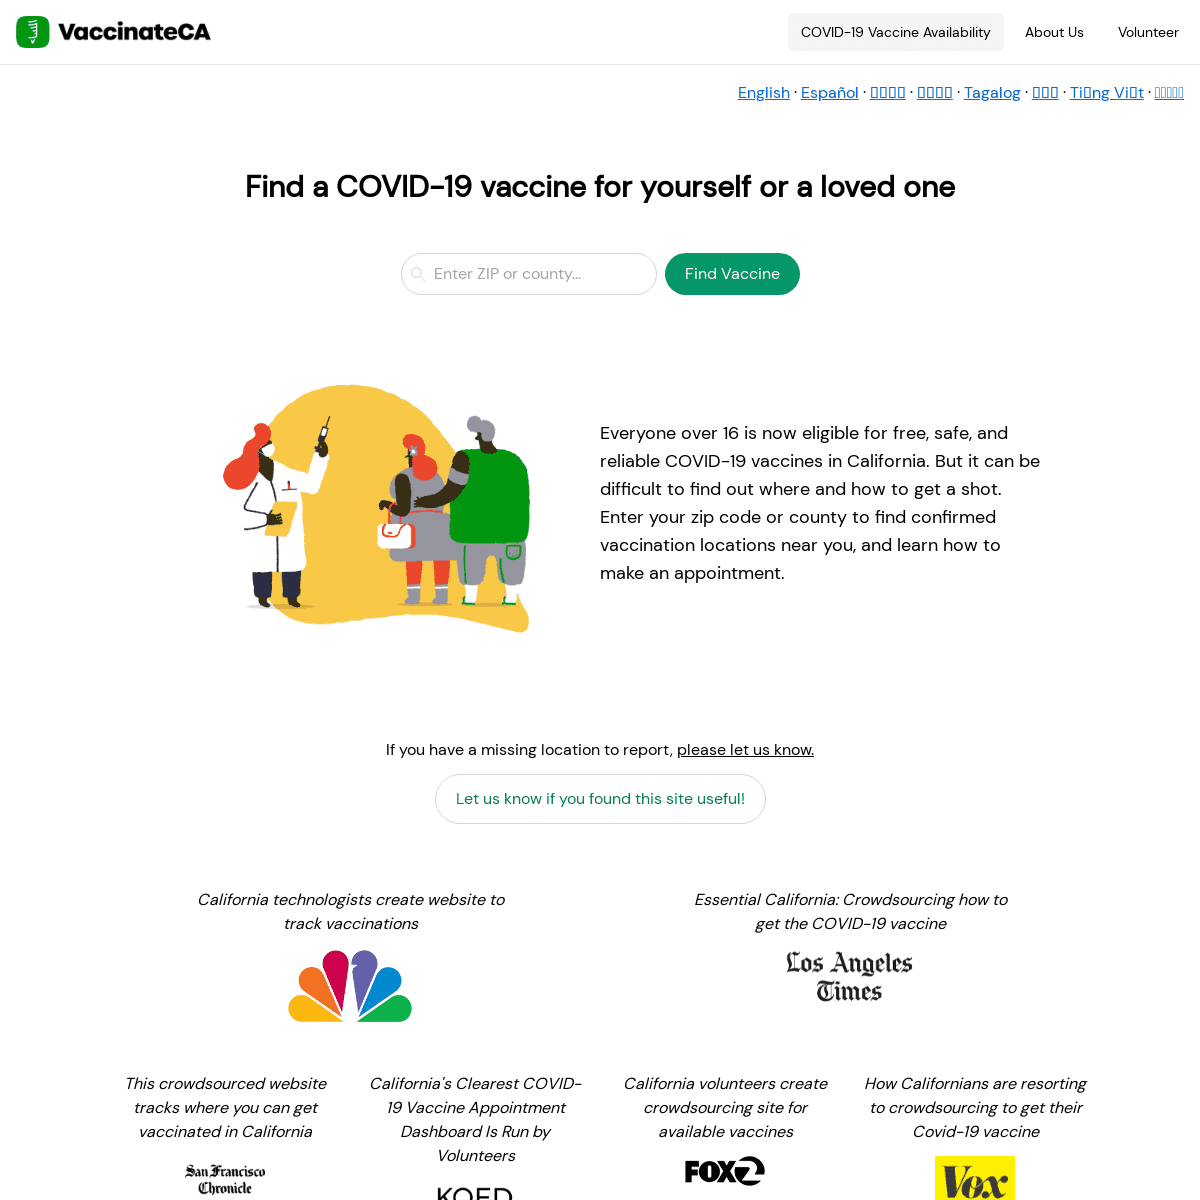 A complete backup of https://vaccinateca.com